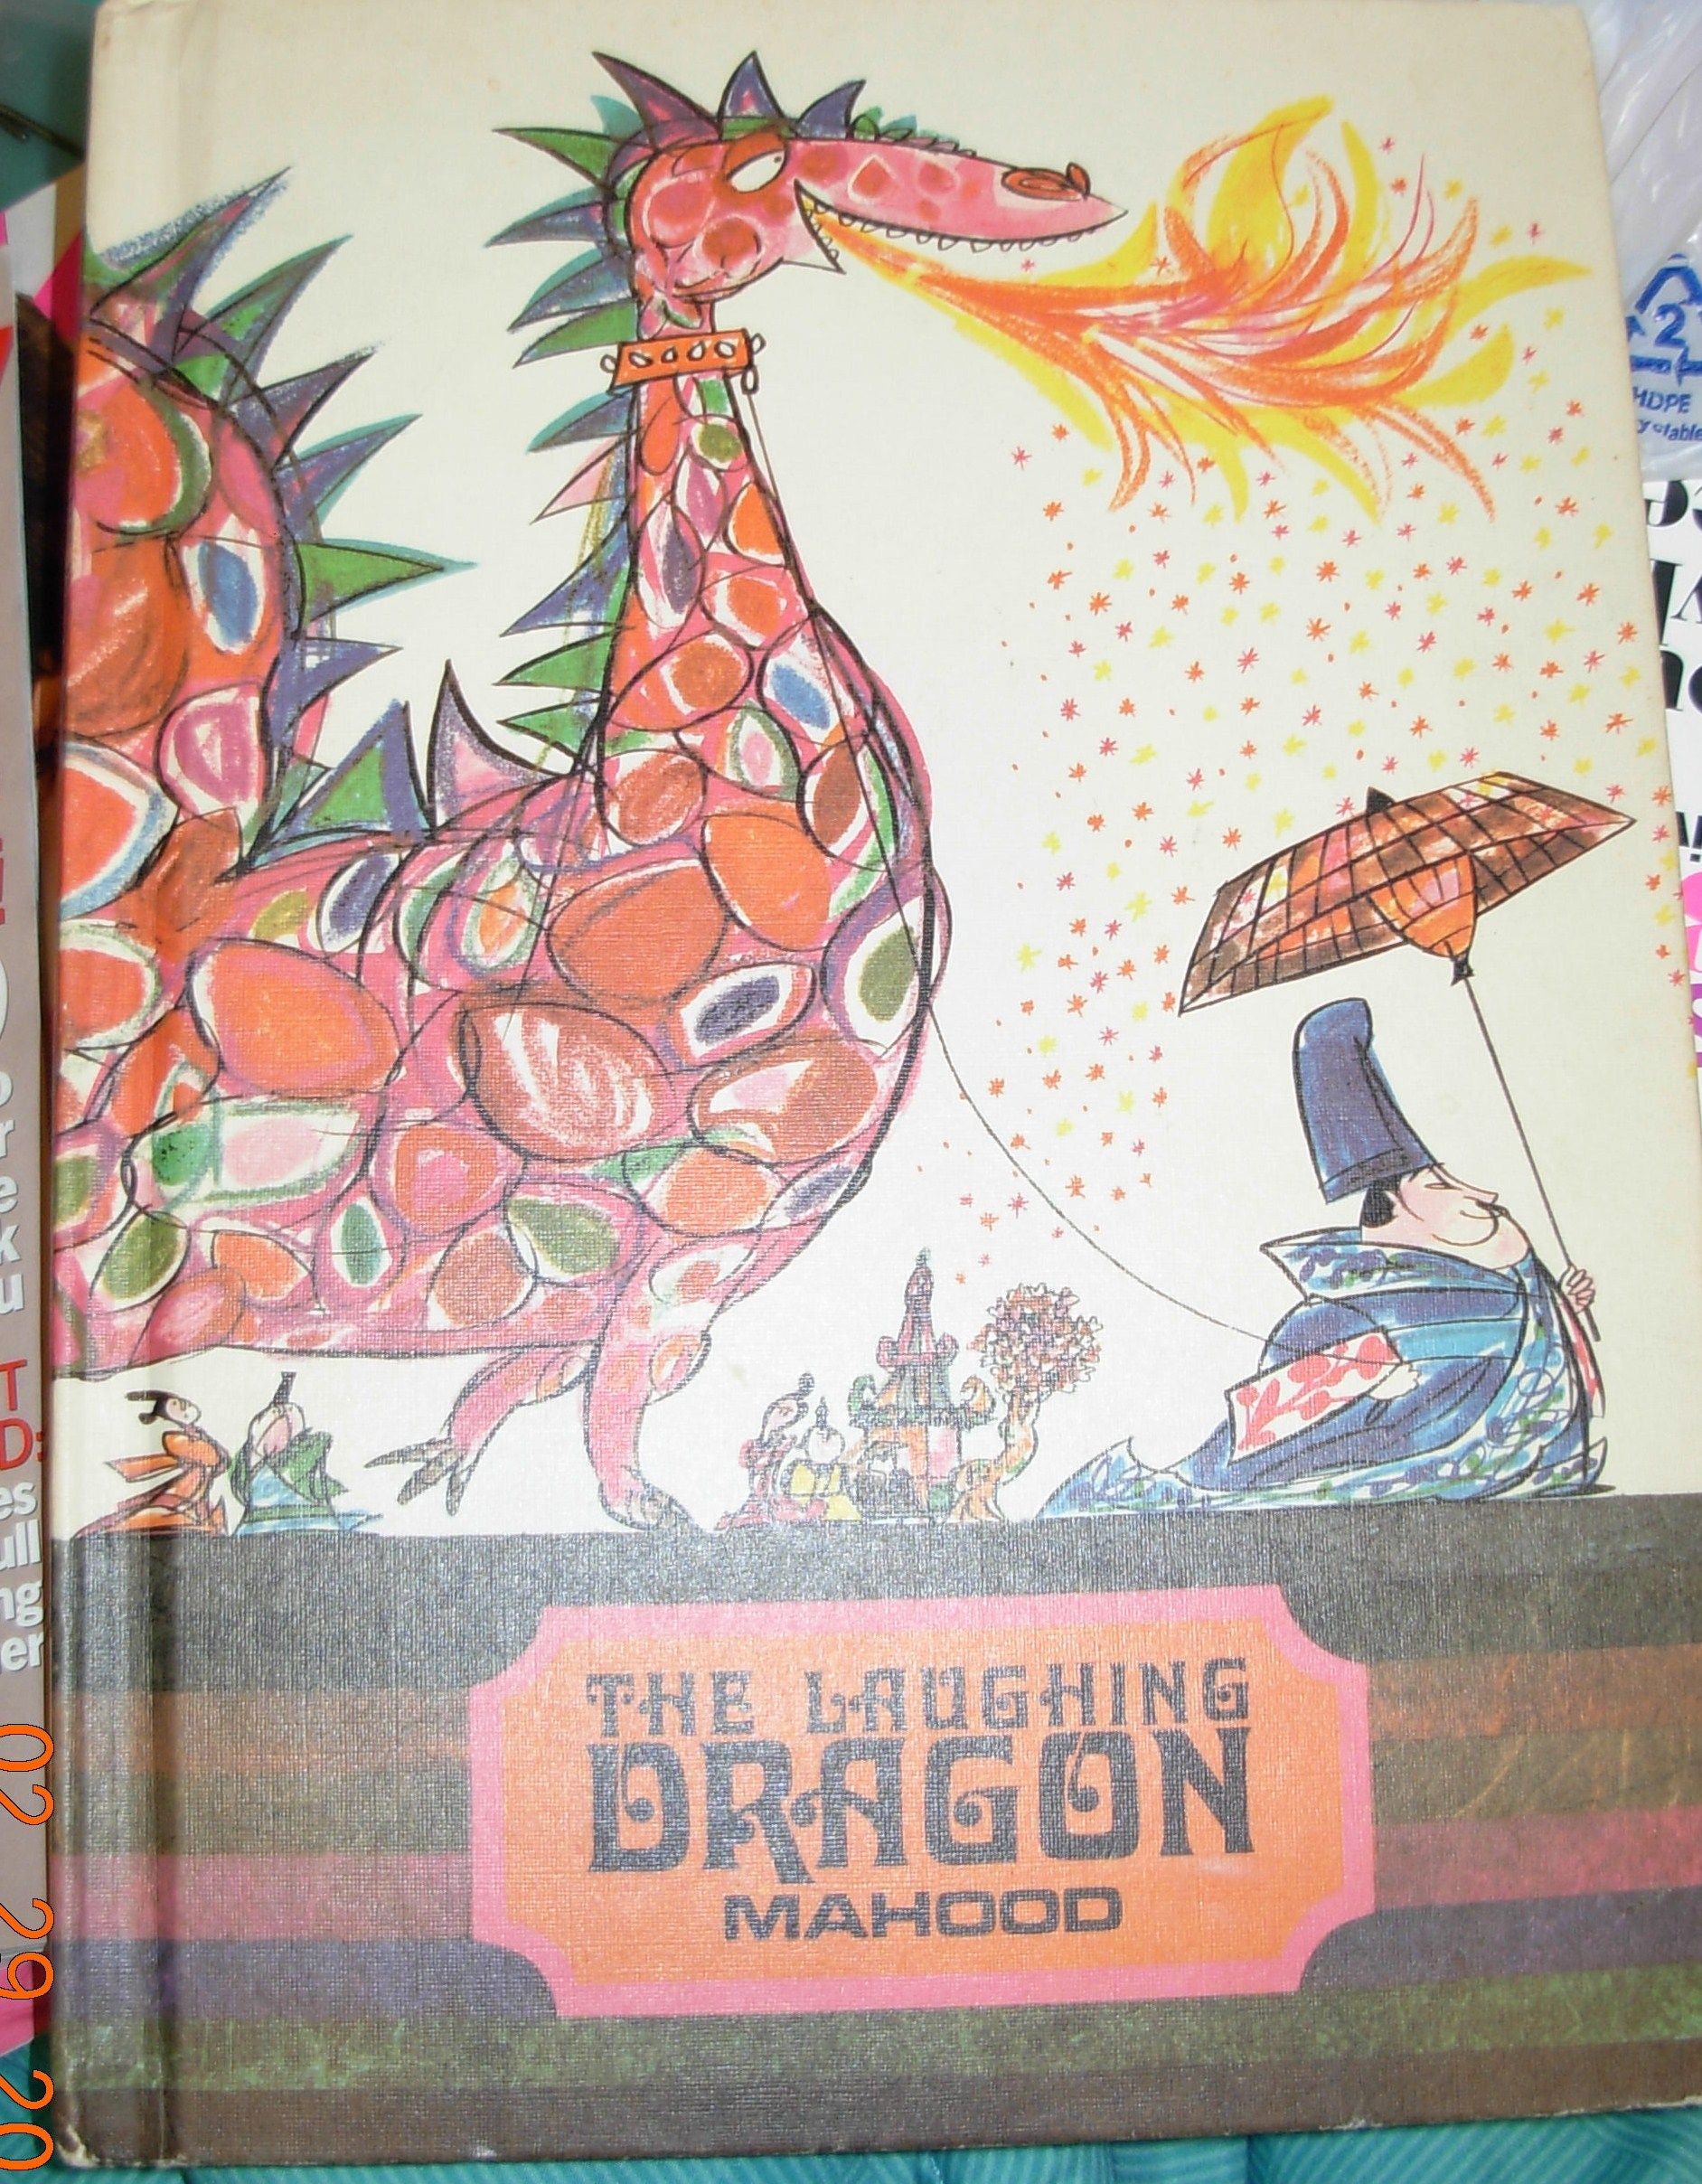 The Laughing Dragon. One of my favorite books when I was a child ...